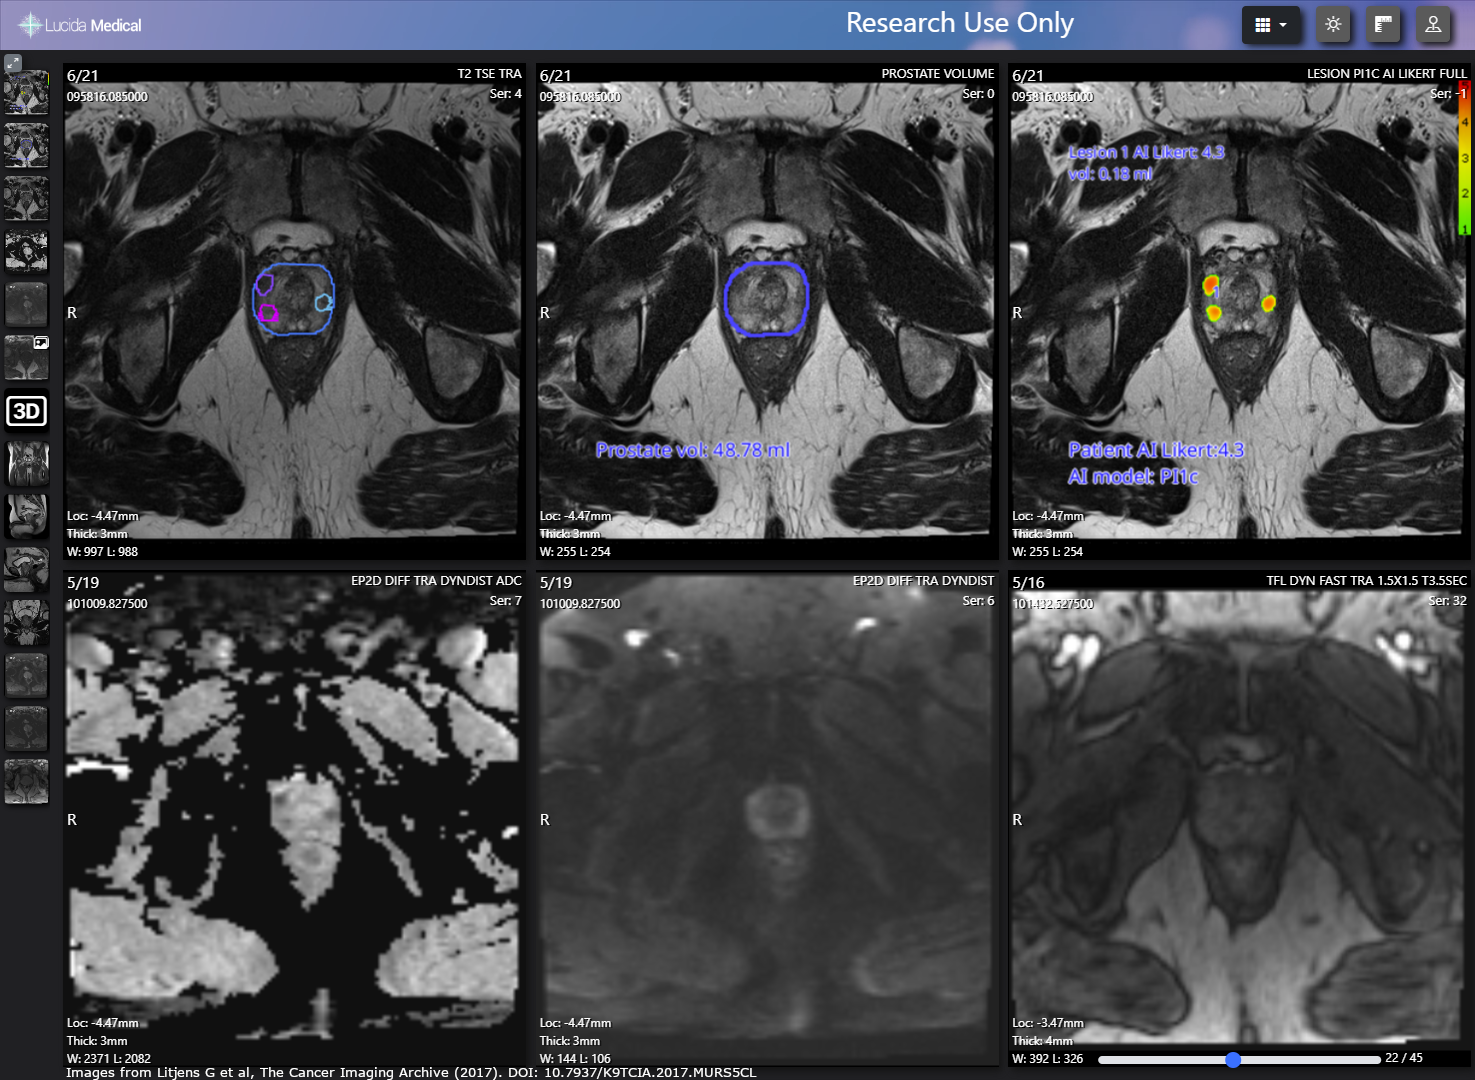 View of prostate MRI study annotated by Lucida Medical Prostate Intelligence AI